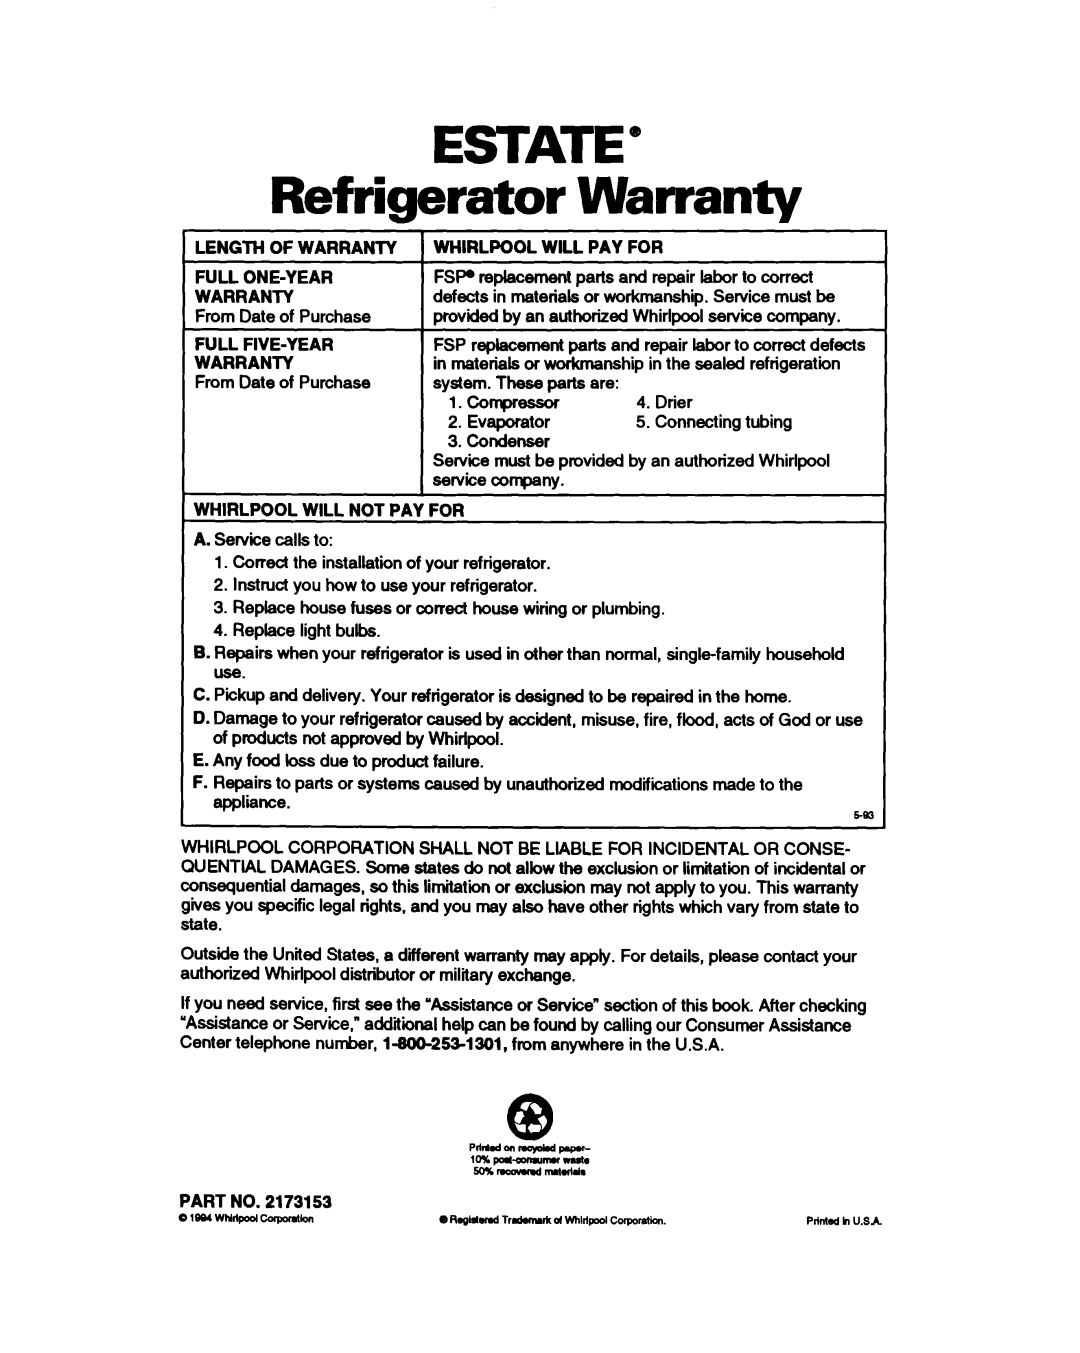 Estate TS25AQ warranty Refrigerator, Length Of Warranty, Whirlpool Will Pay For, Full One-Year, Full Five-Year, Estate” 